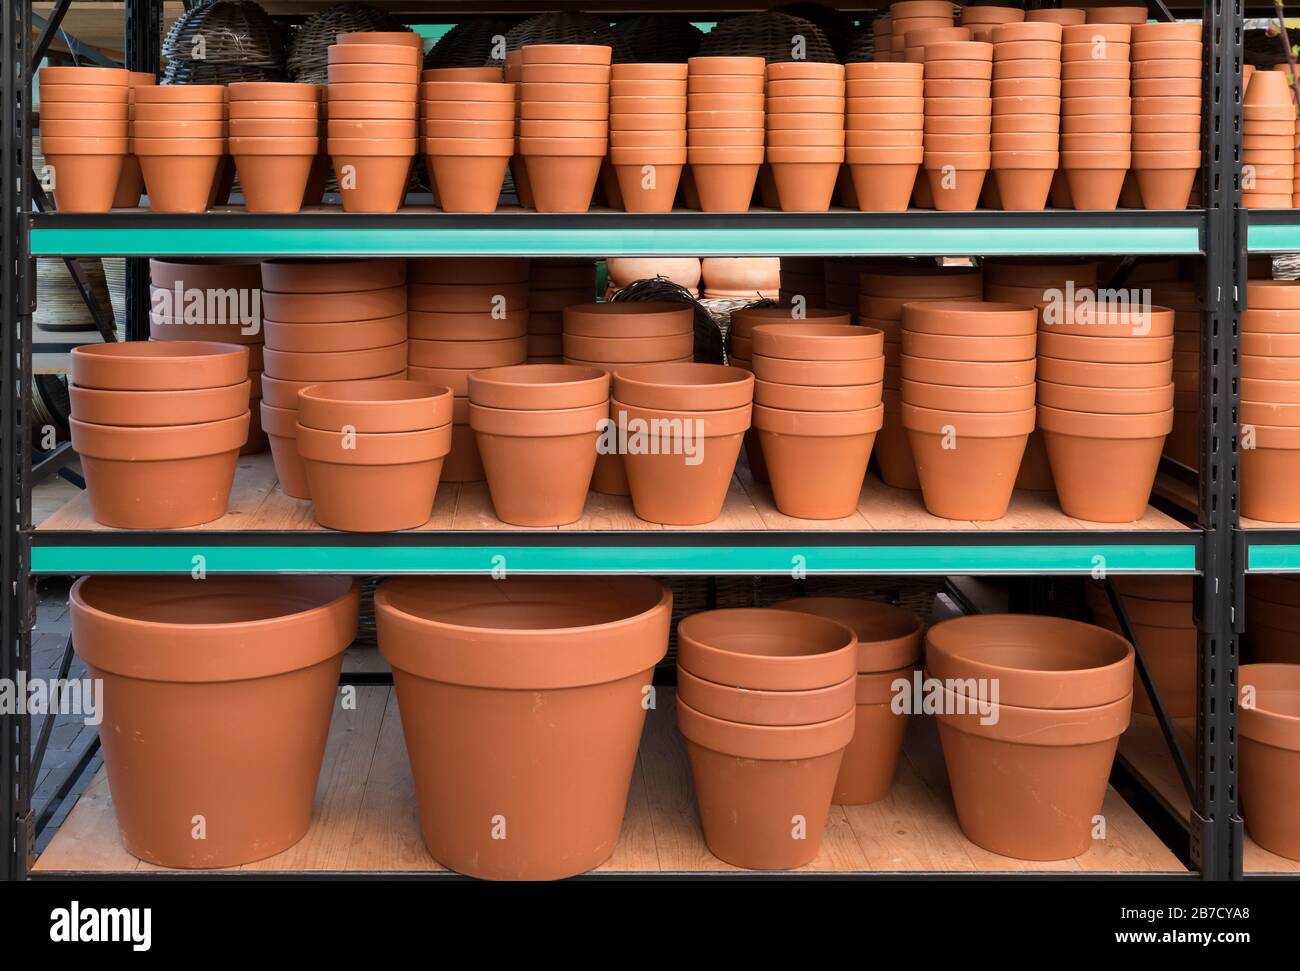 Ceramic flower pots for sale at the market Stock Photo - Alamy